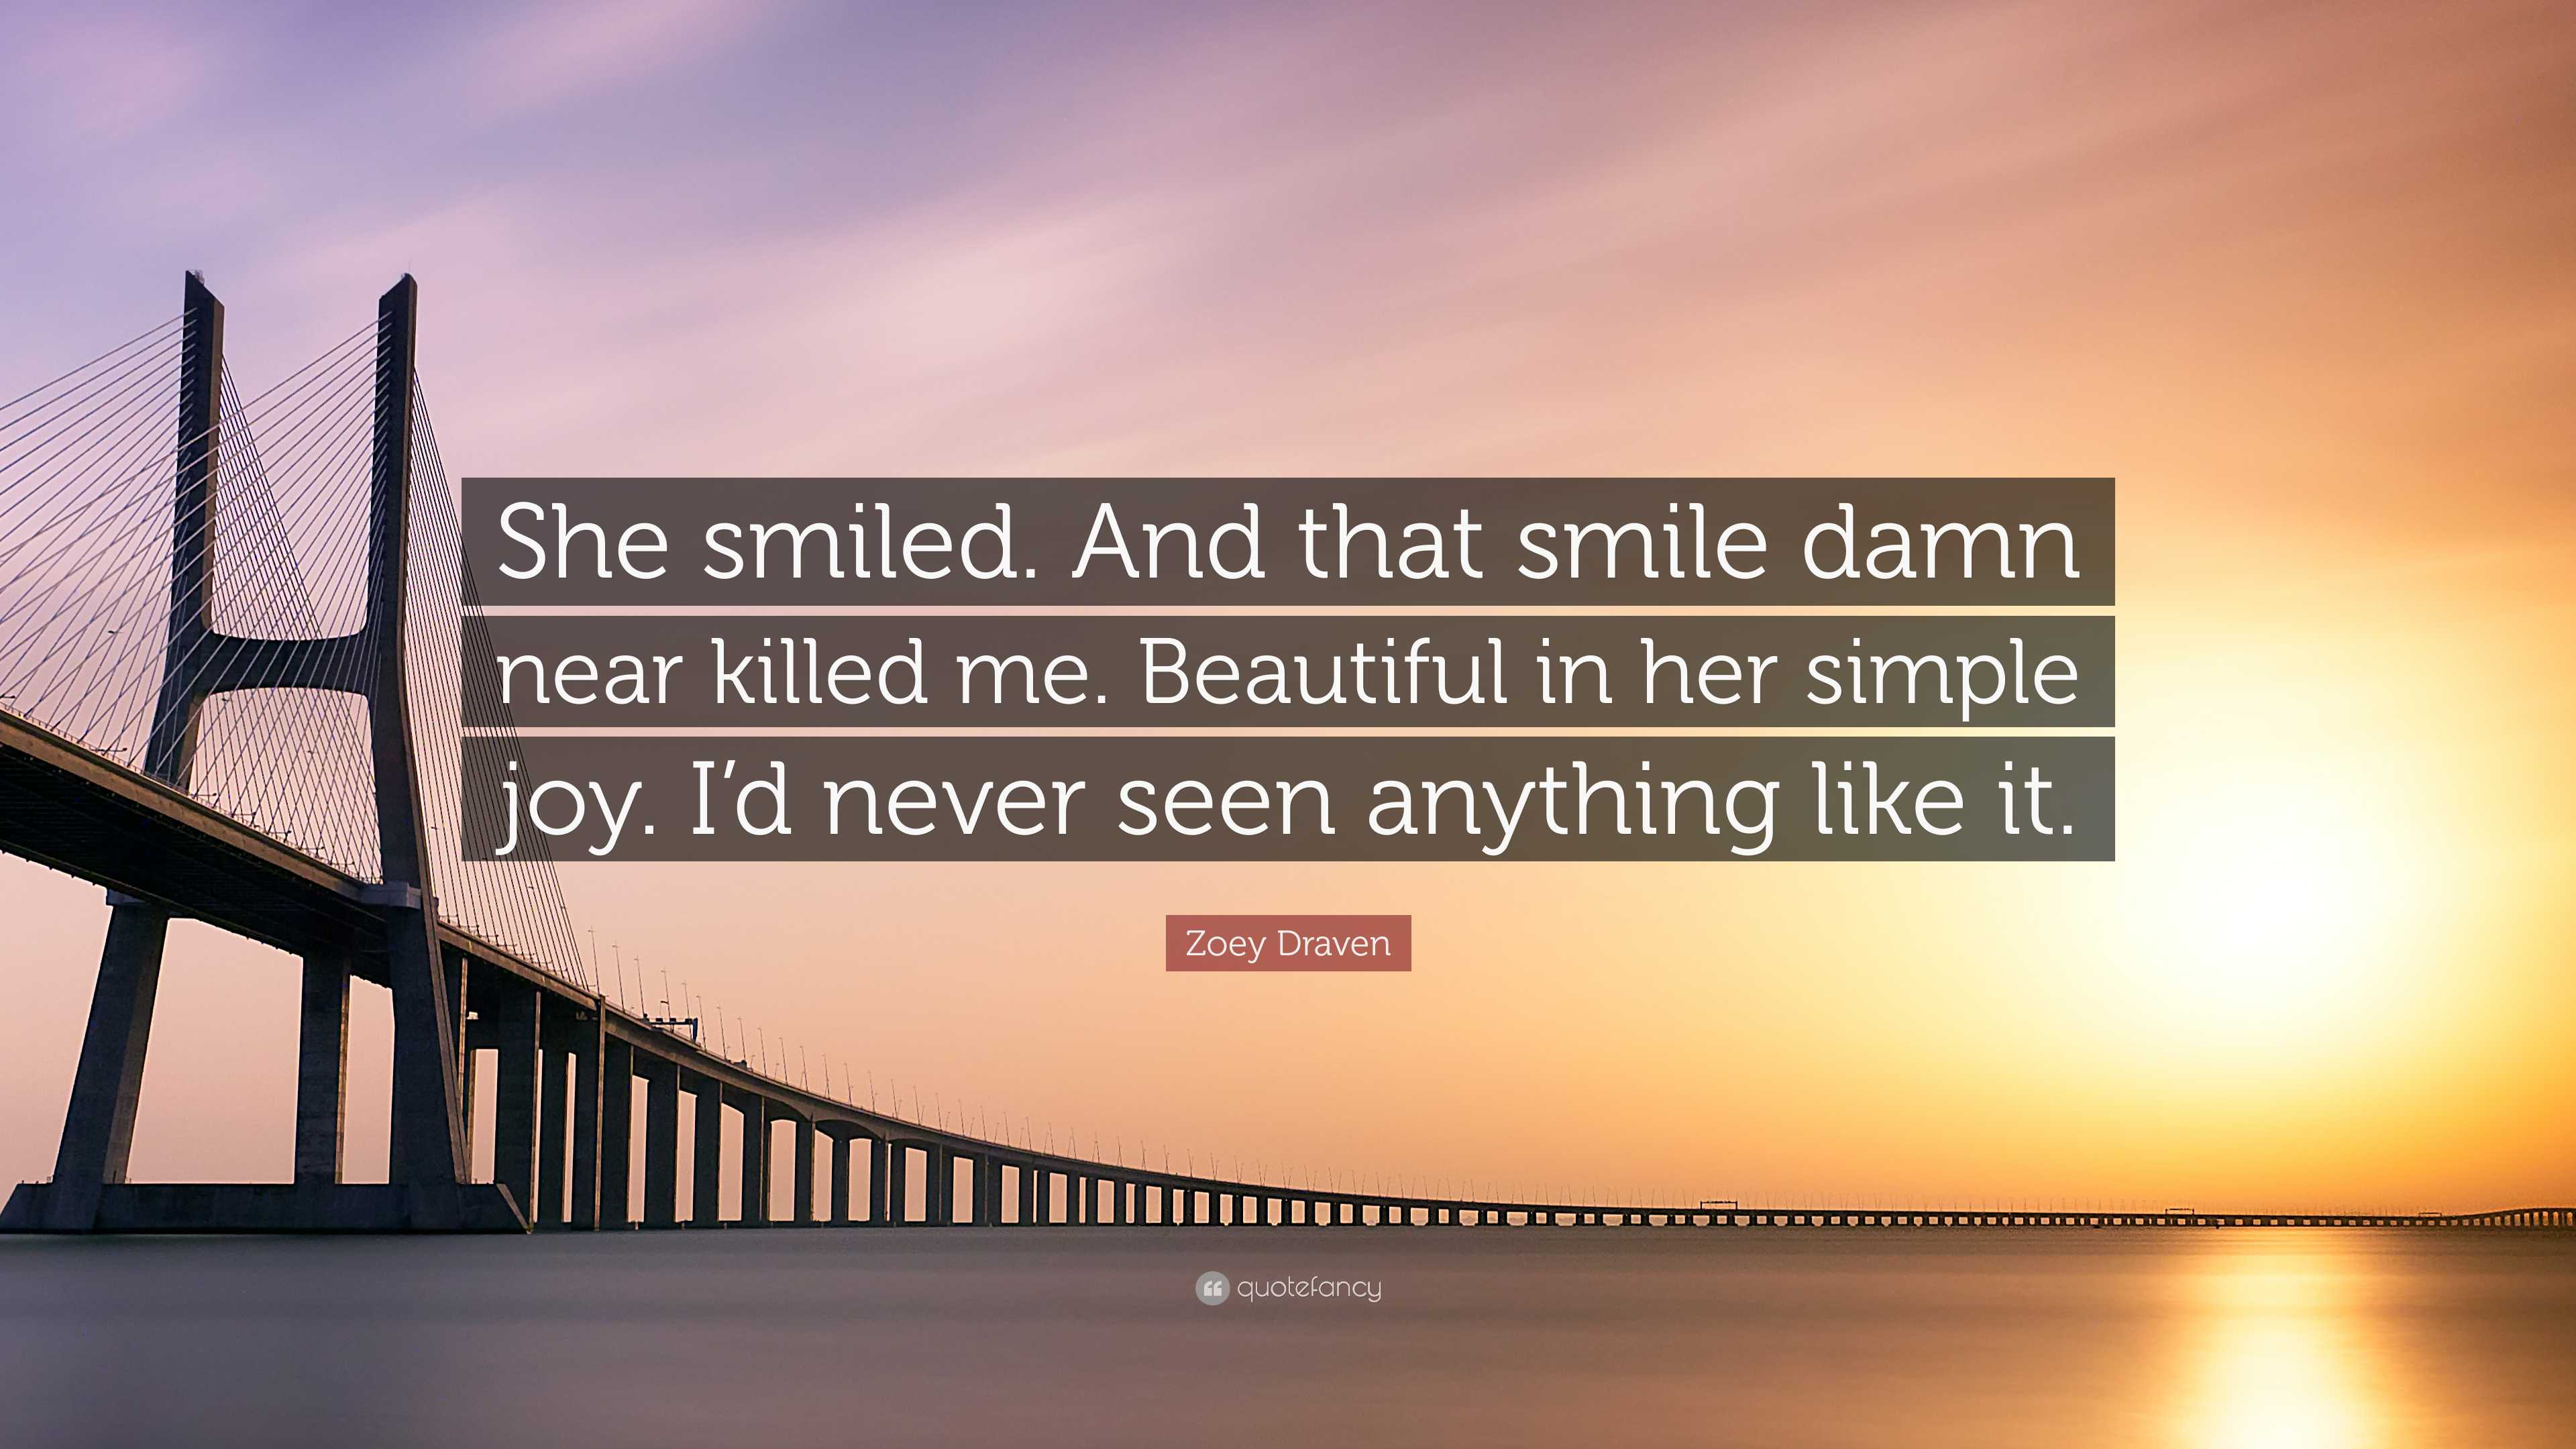 https://quotefancy.com/media/wallpaper/3840x2160/8095289-Zoey-Draven-Quote-She-smiled-And-that-smile-damn-near-killed-me-Beautiful-in-her.jpg